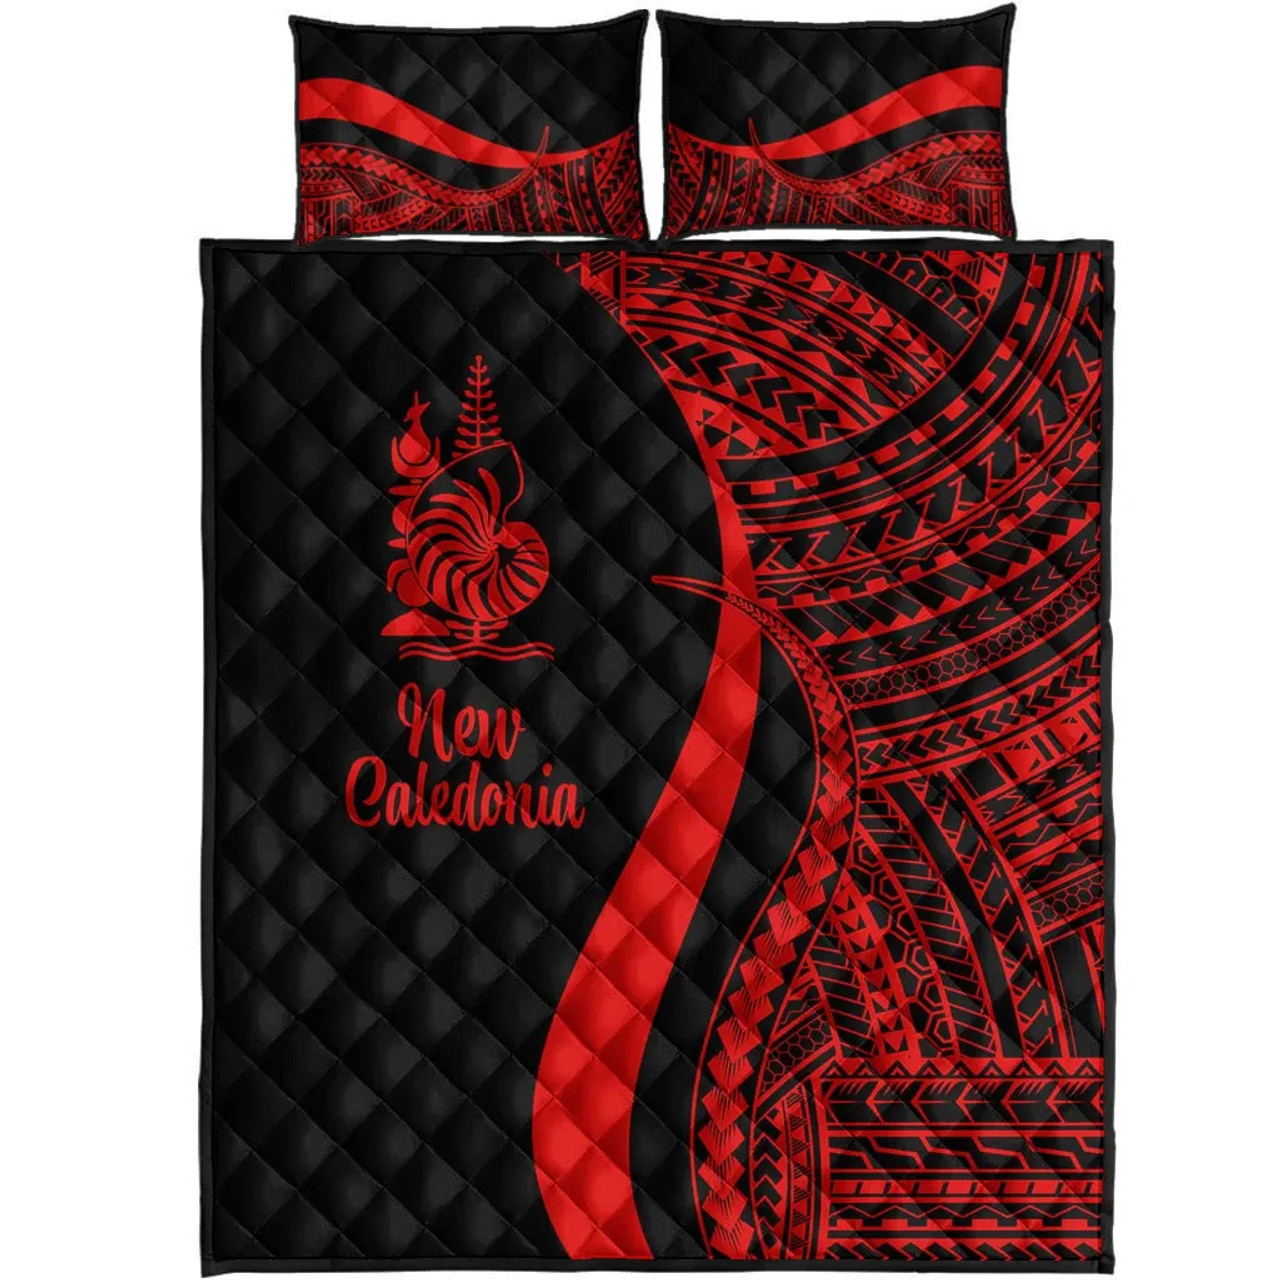 New Caledonia Quilt Bet Set - Red Polynesian Tentacle Tribal Pattern 5